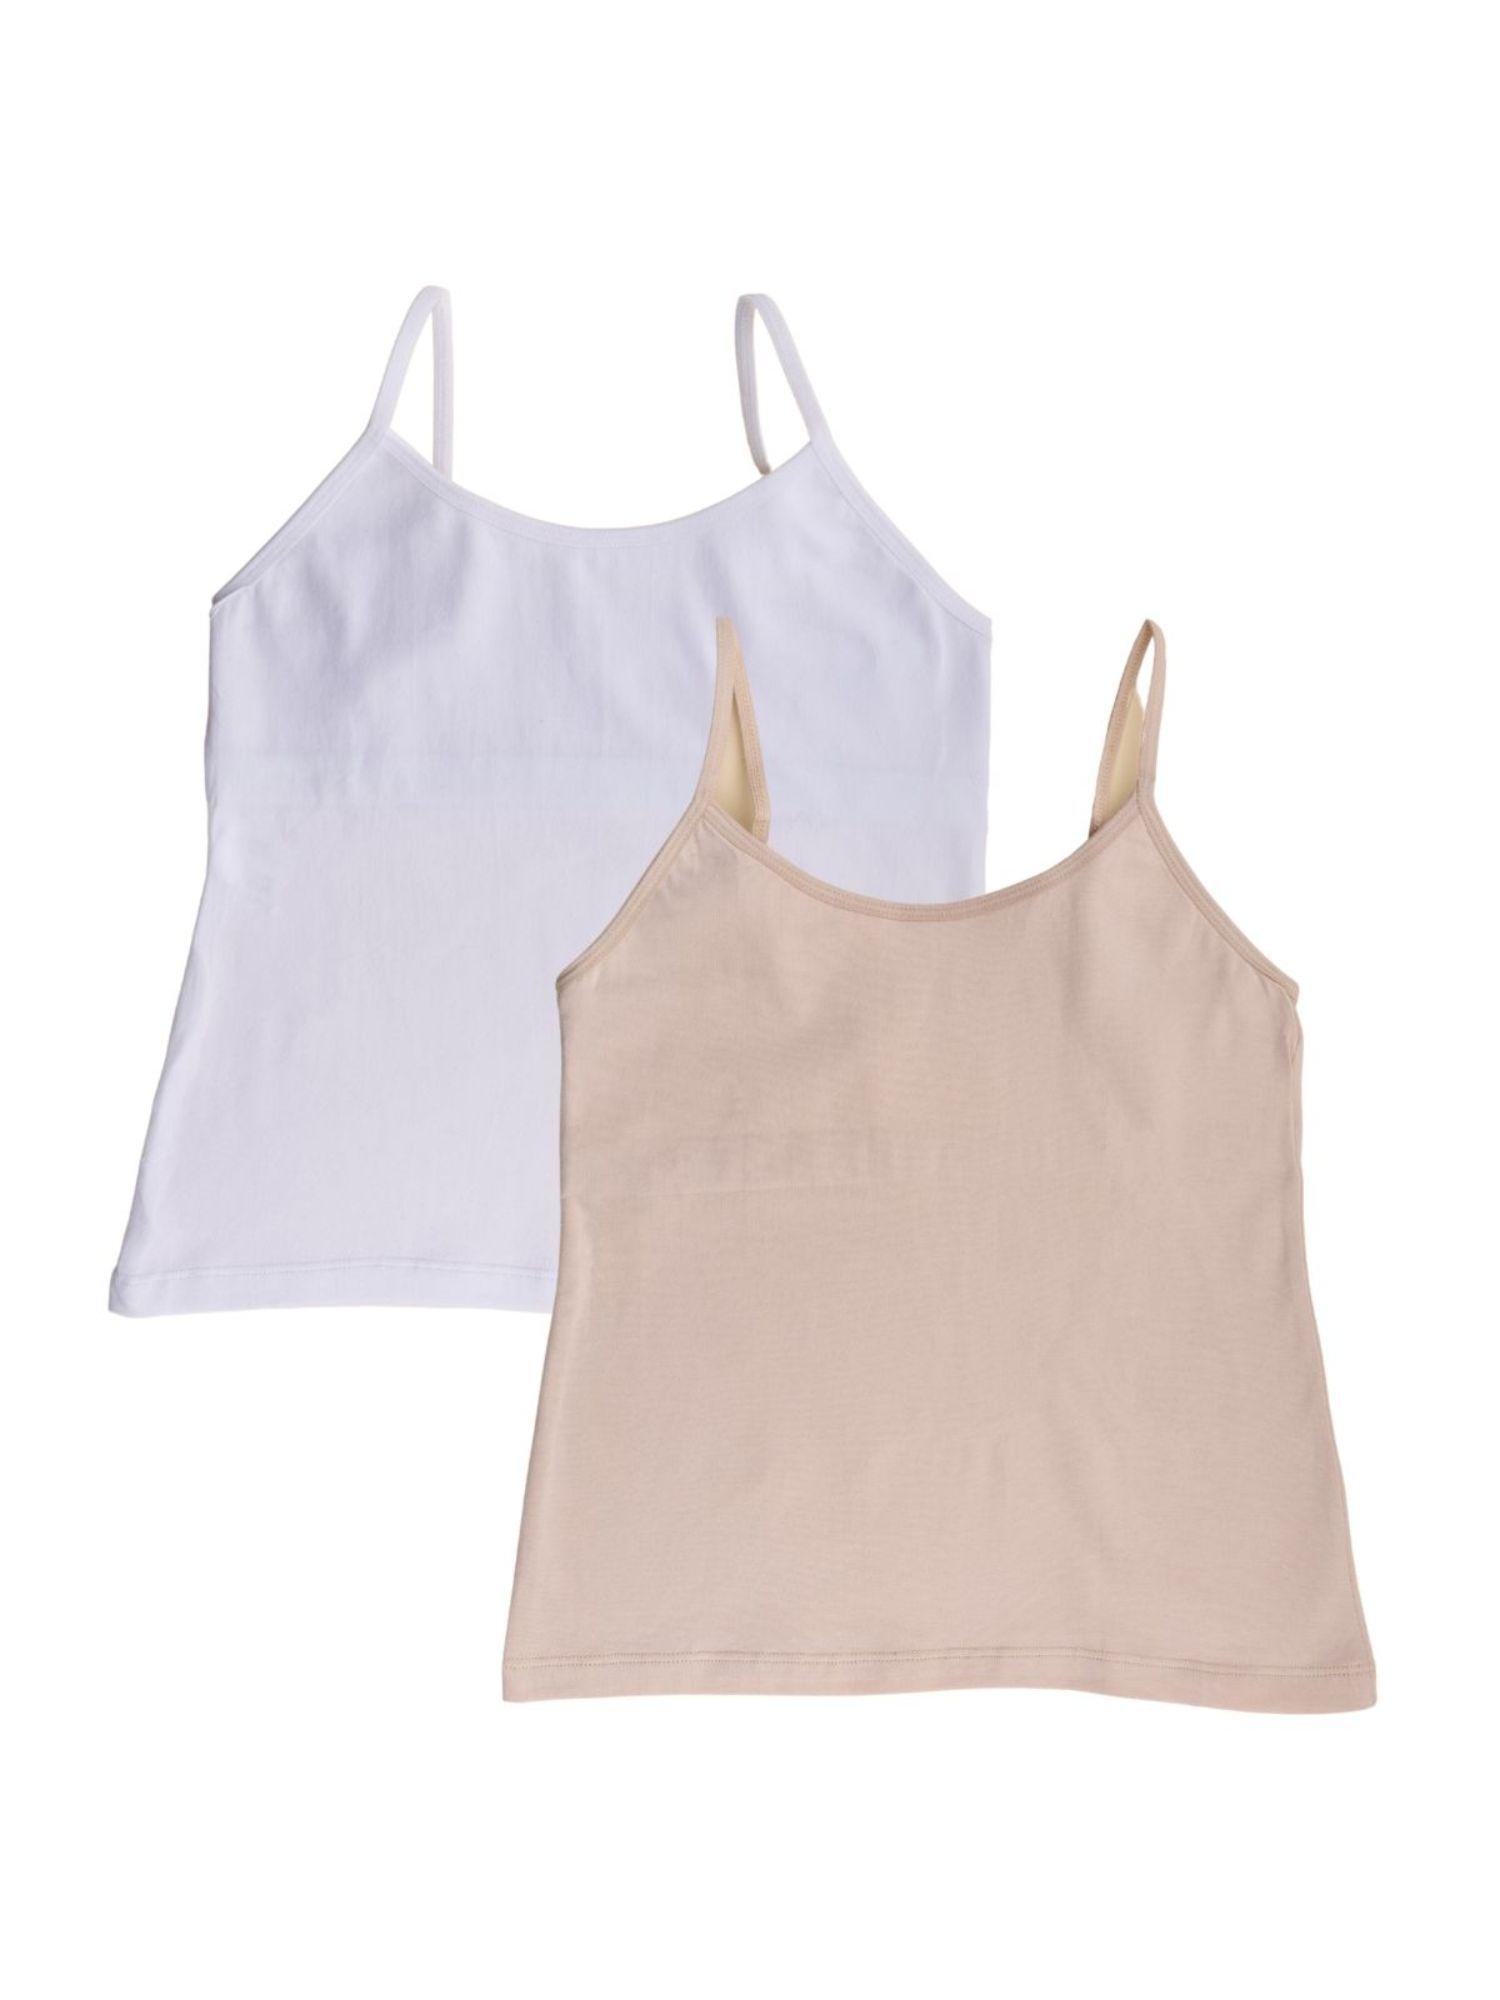 pack of 2 starter camisole - padded - multi-color